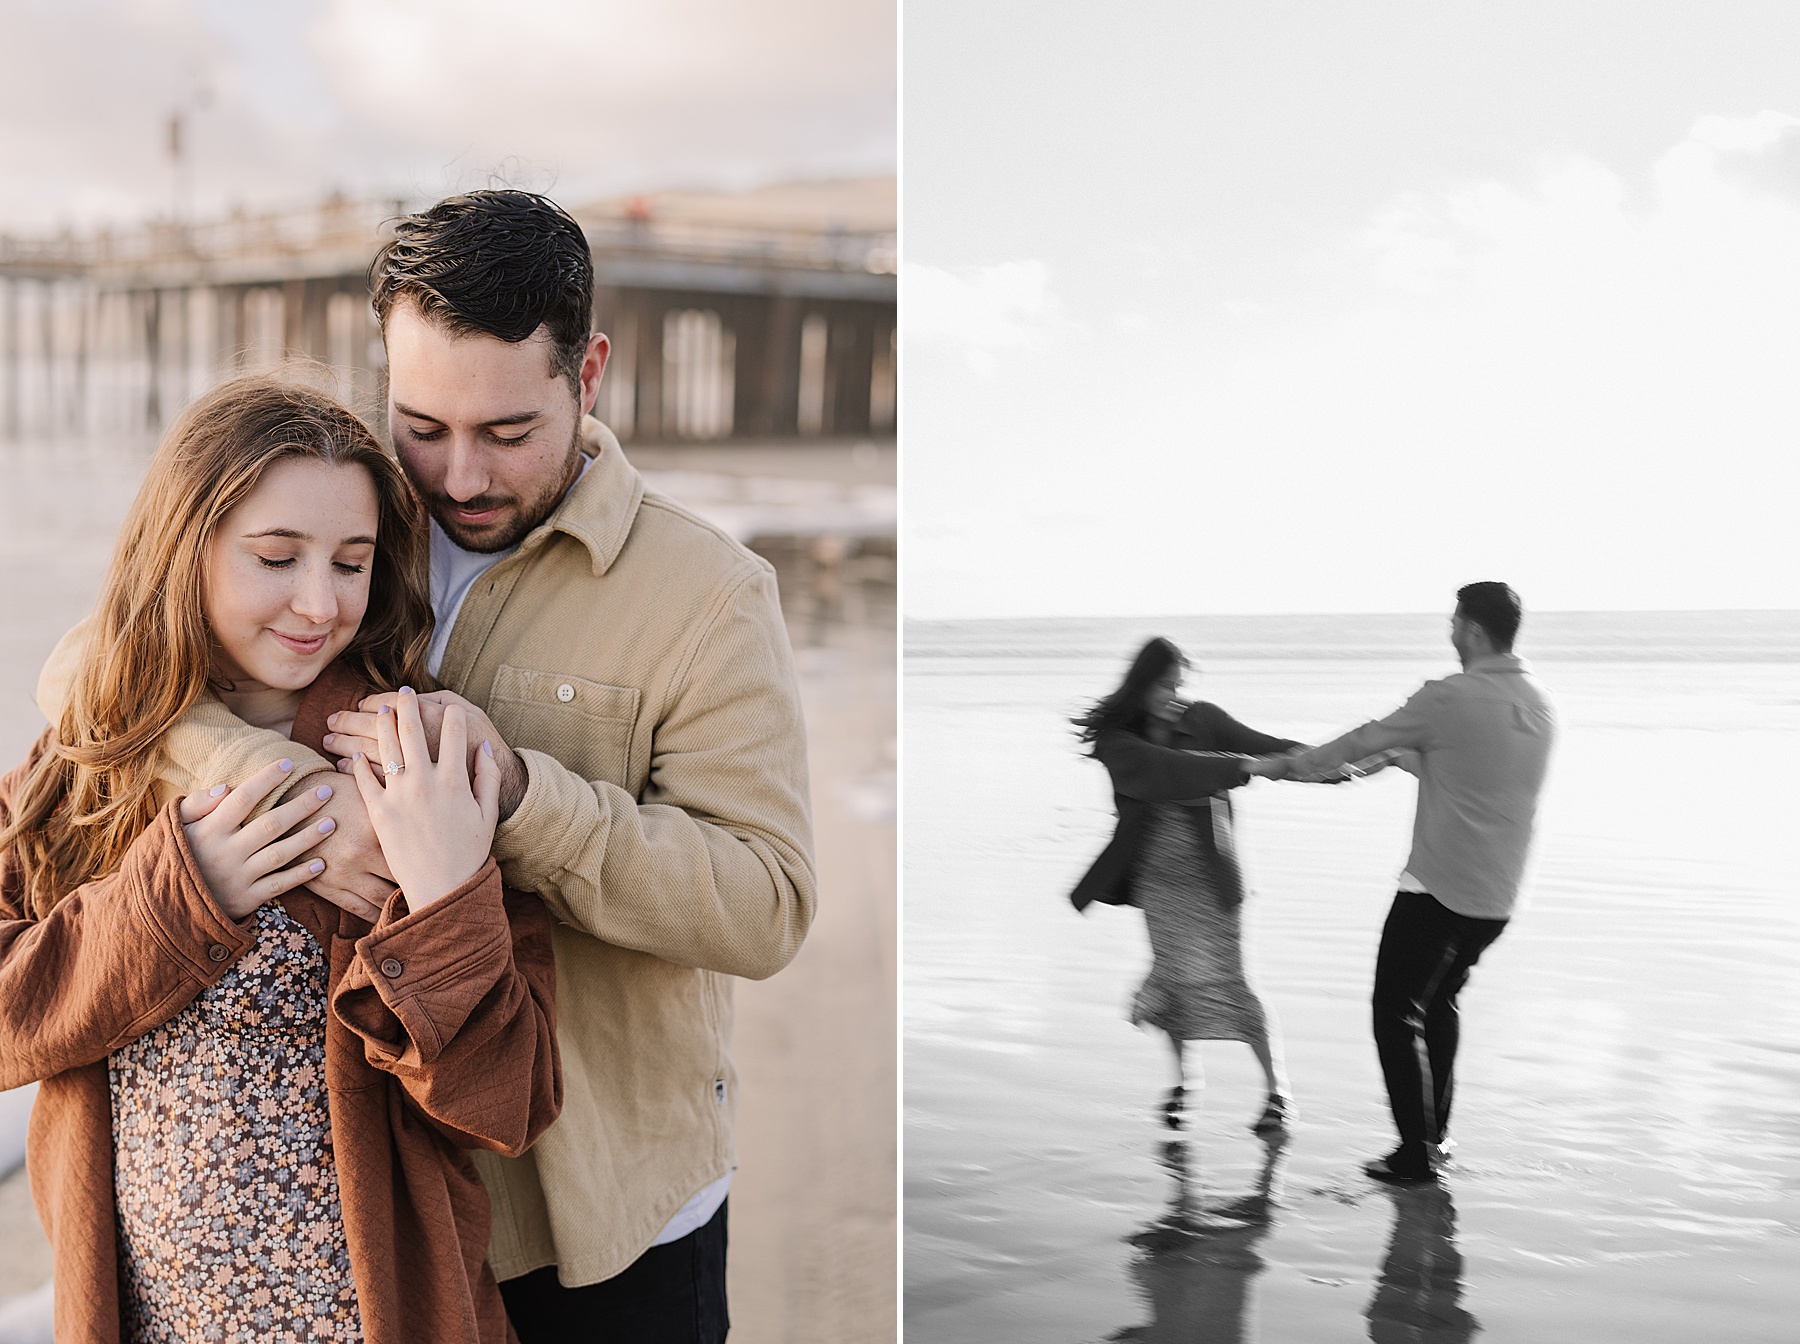 After planning a surprise elopement, a couple poses on central California coast.